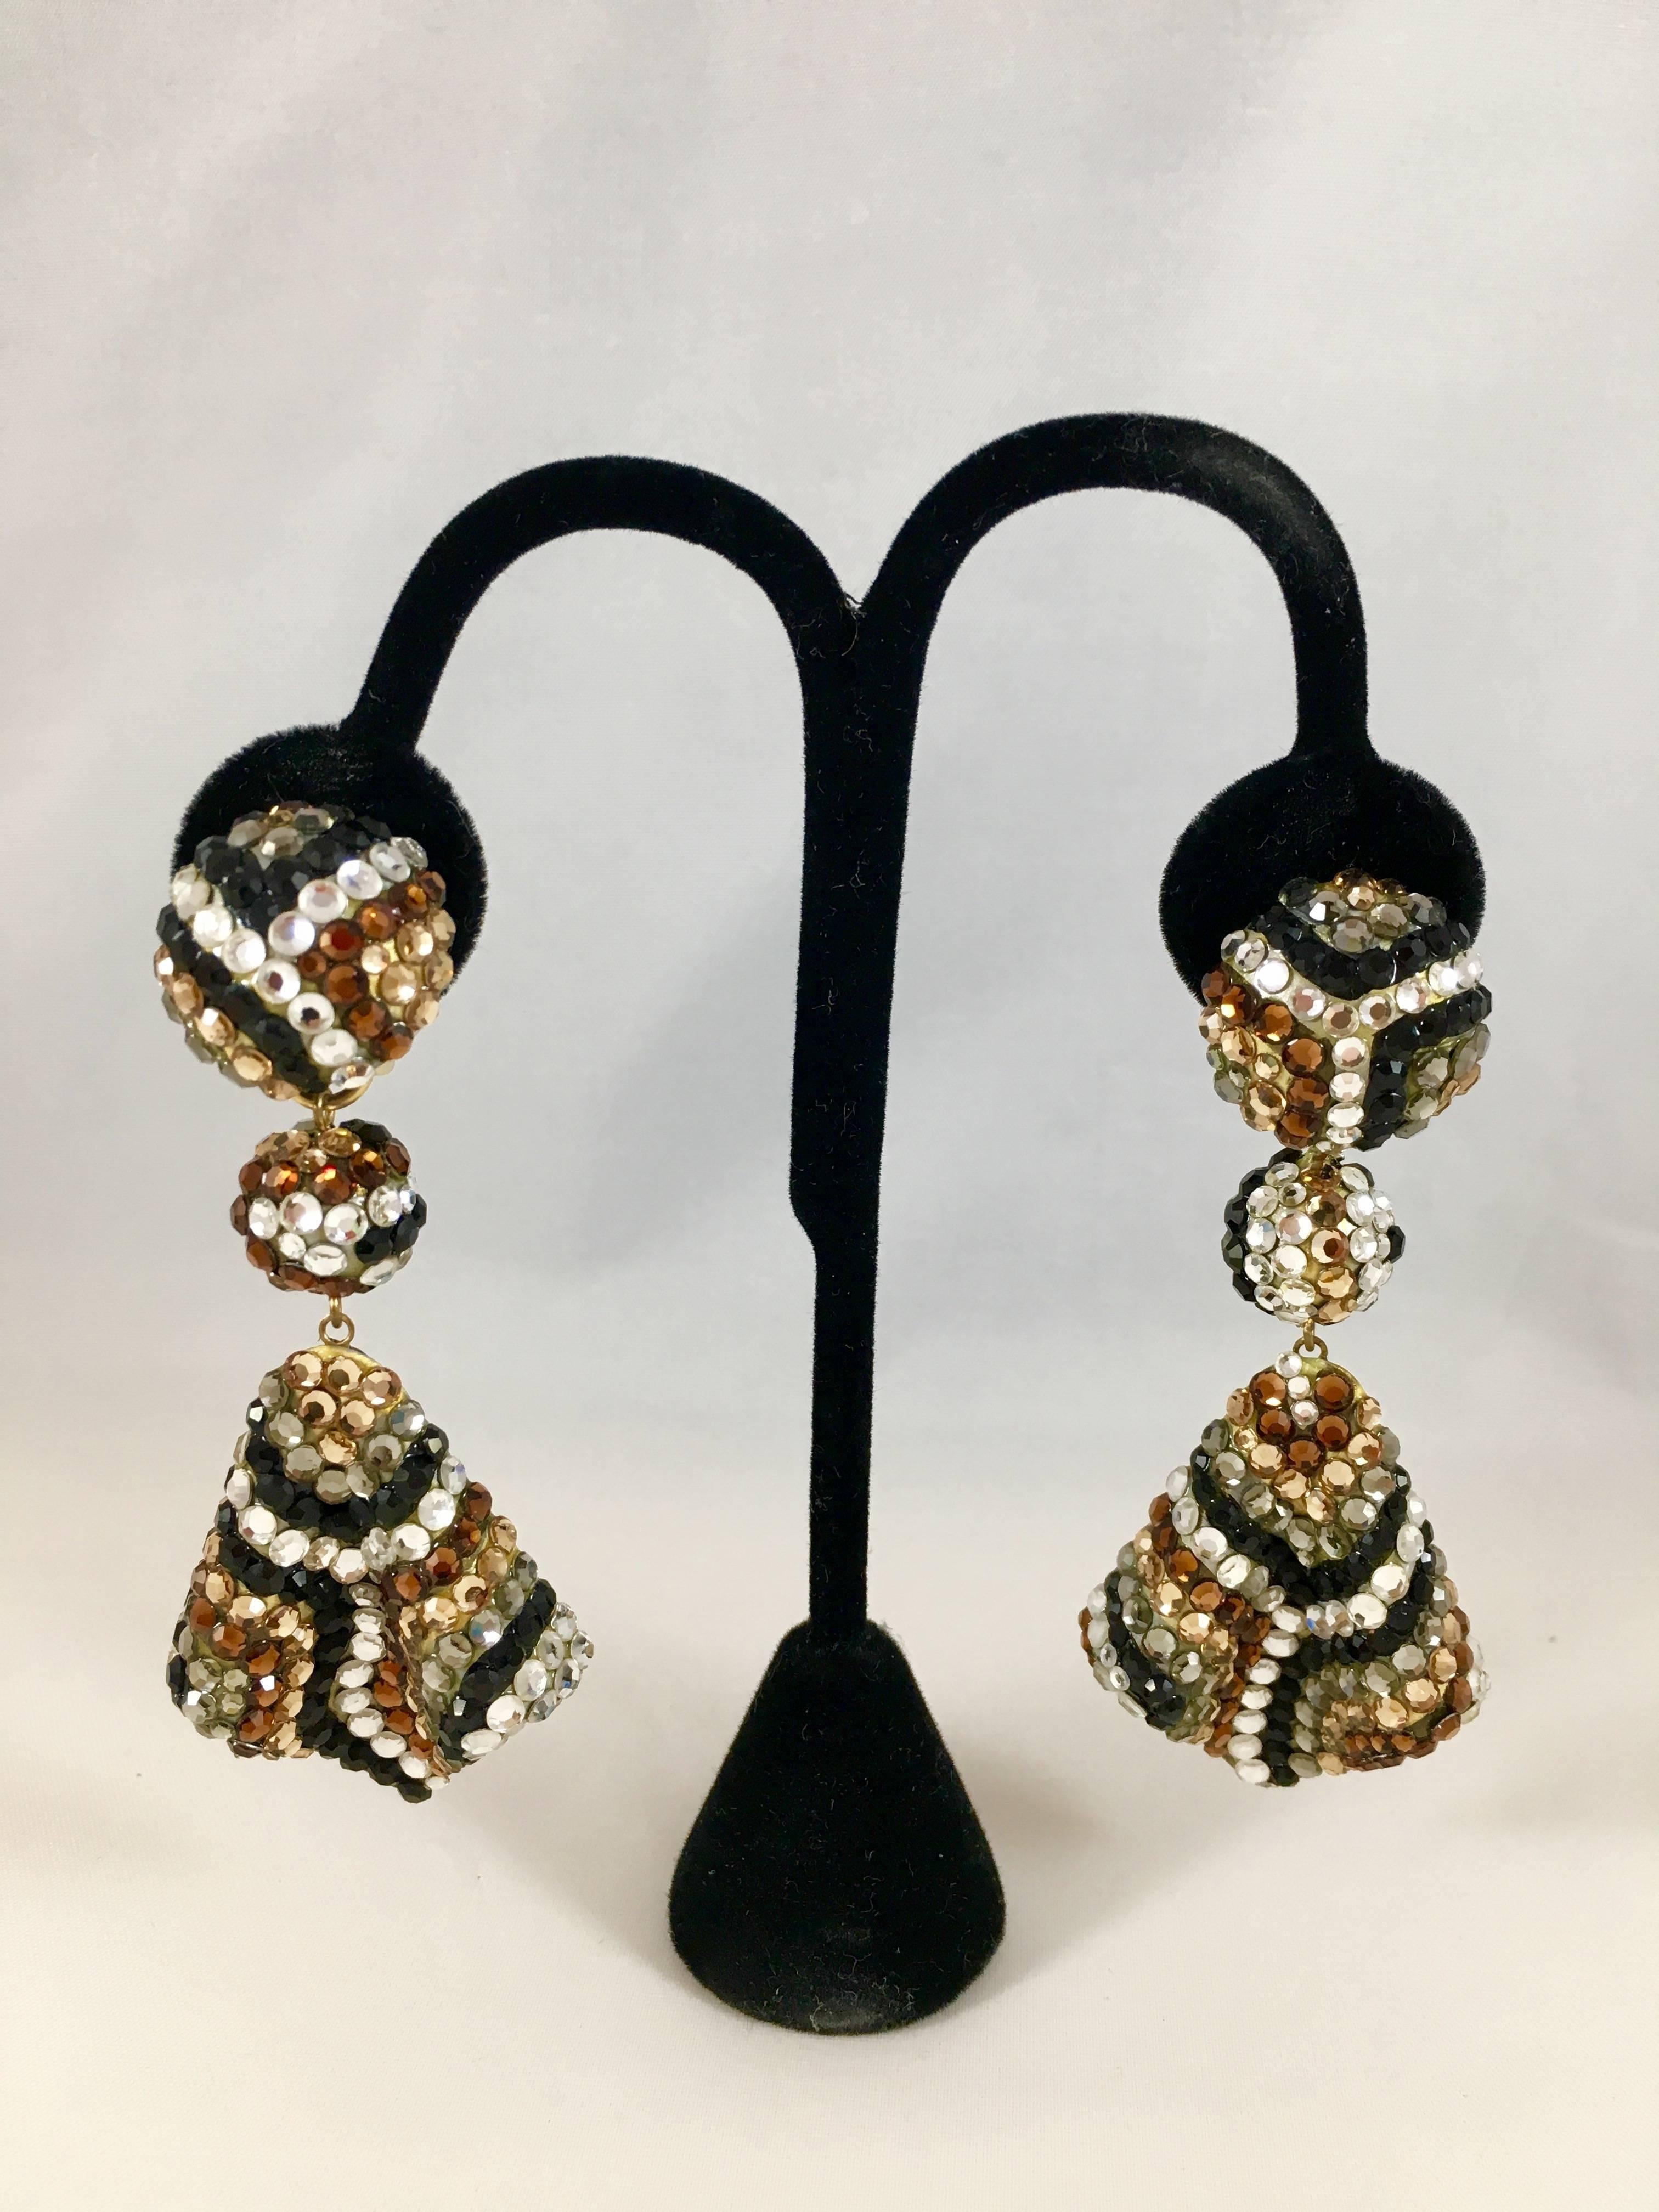 These cool statement earrings were made by Richard Kerr in the 1980s. They feature his signature all-over pave rhinestones in a pattern that evokes an animal print. They are signed 'Richard Kerr' in a plaque on the back of the earrings. The earrings